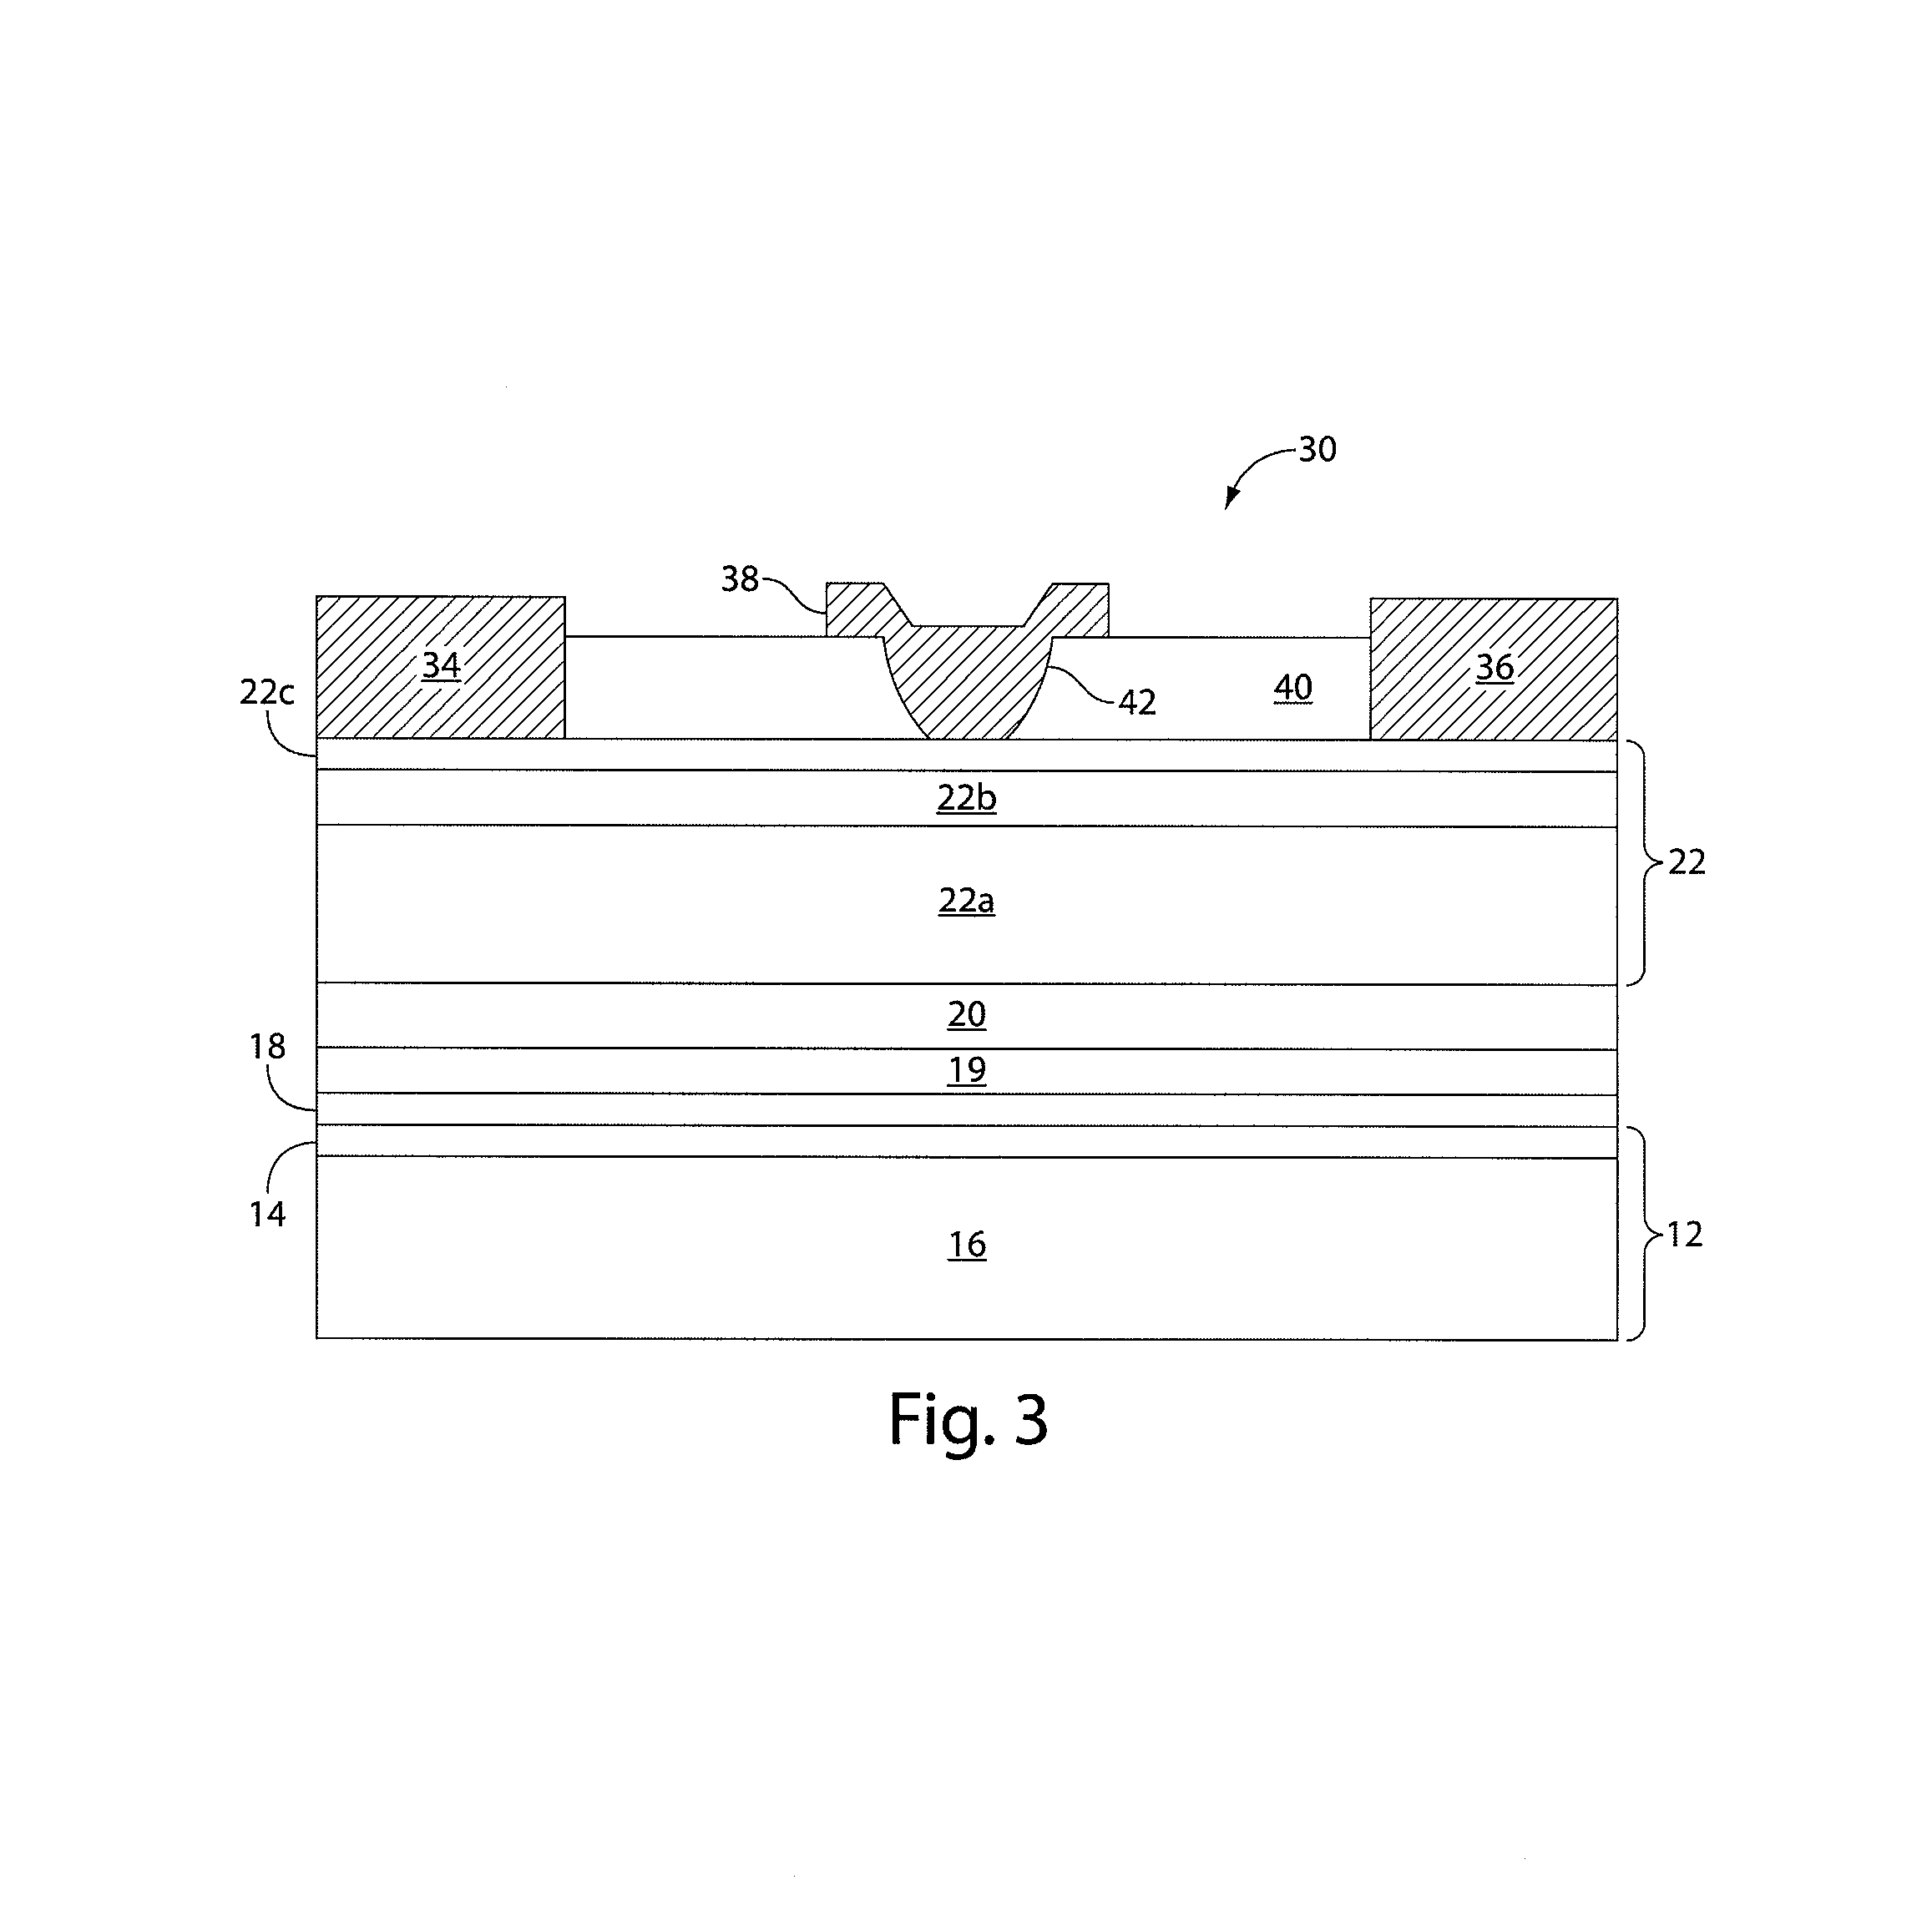 Gallium nitride material structures including substrates and methods associated with the same